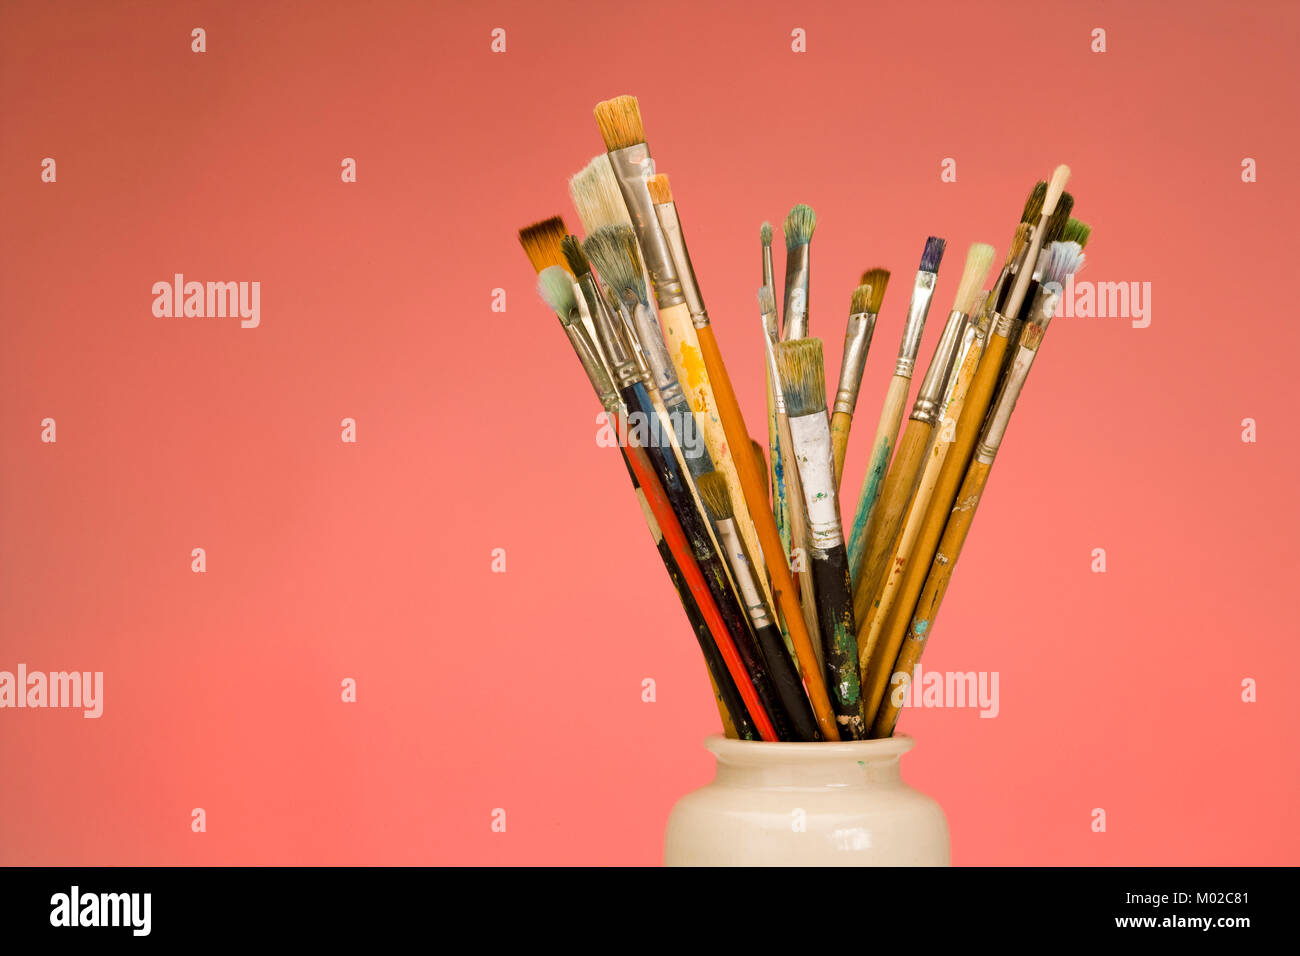 Artists paint brushes in a pot Stock Photo